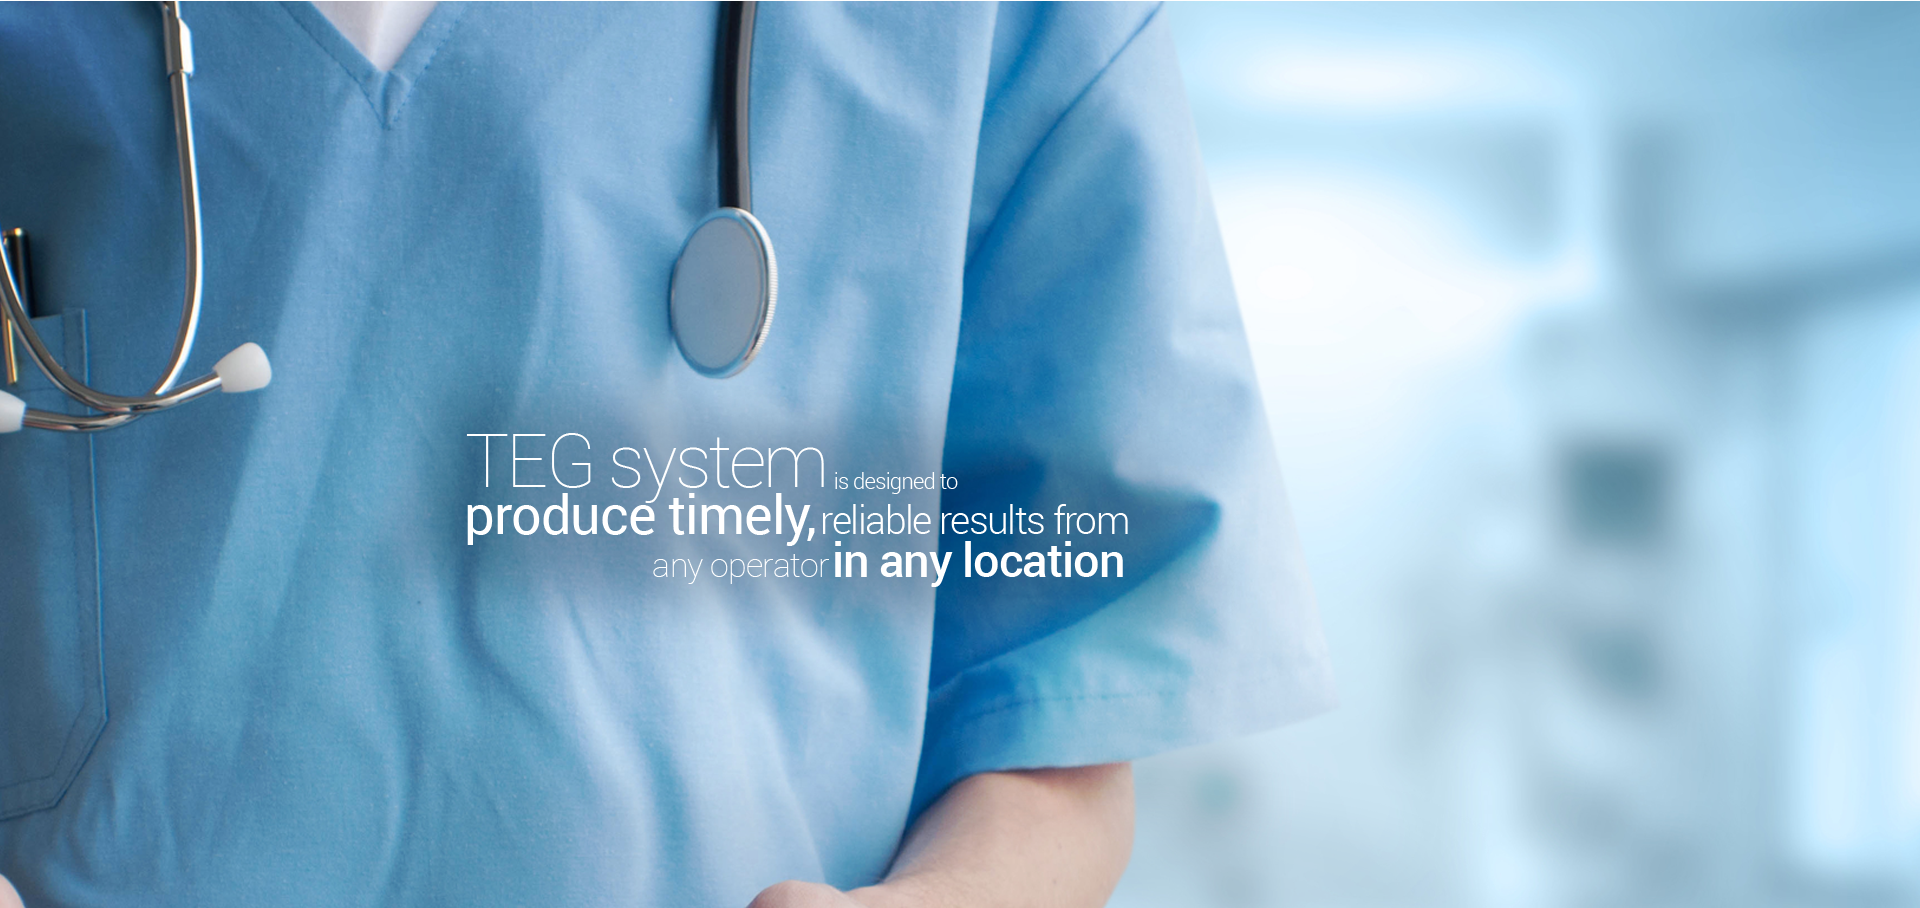 TEG system is designed to produce timely, reliable results from any operator in any location